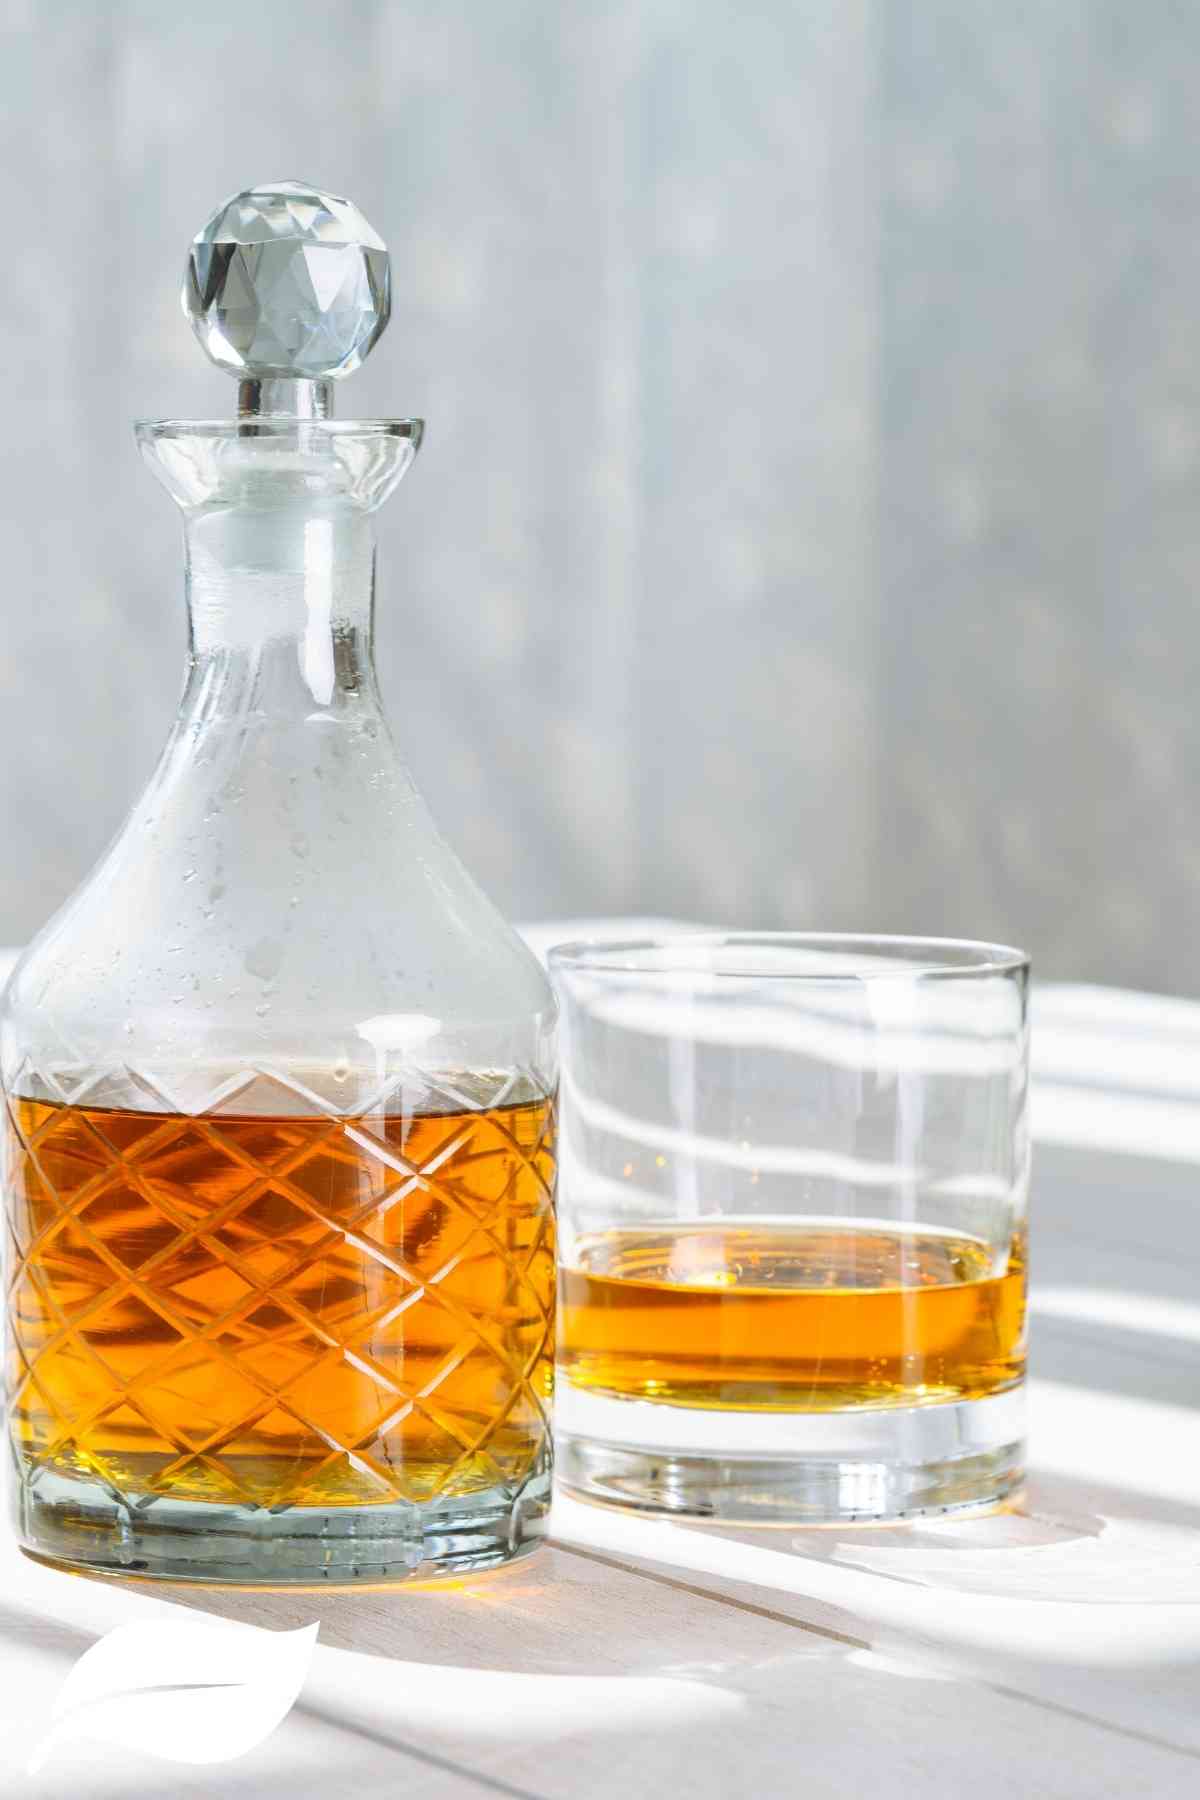 Whisky Decanter and low ball glass both with whisky in